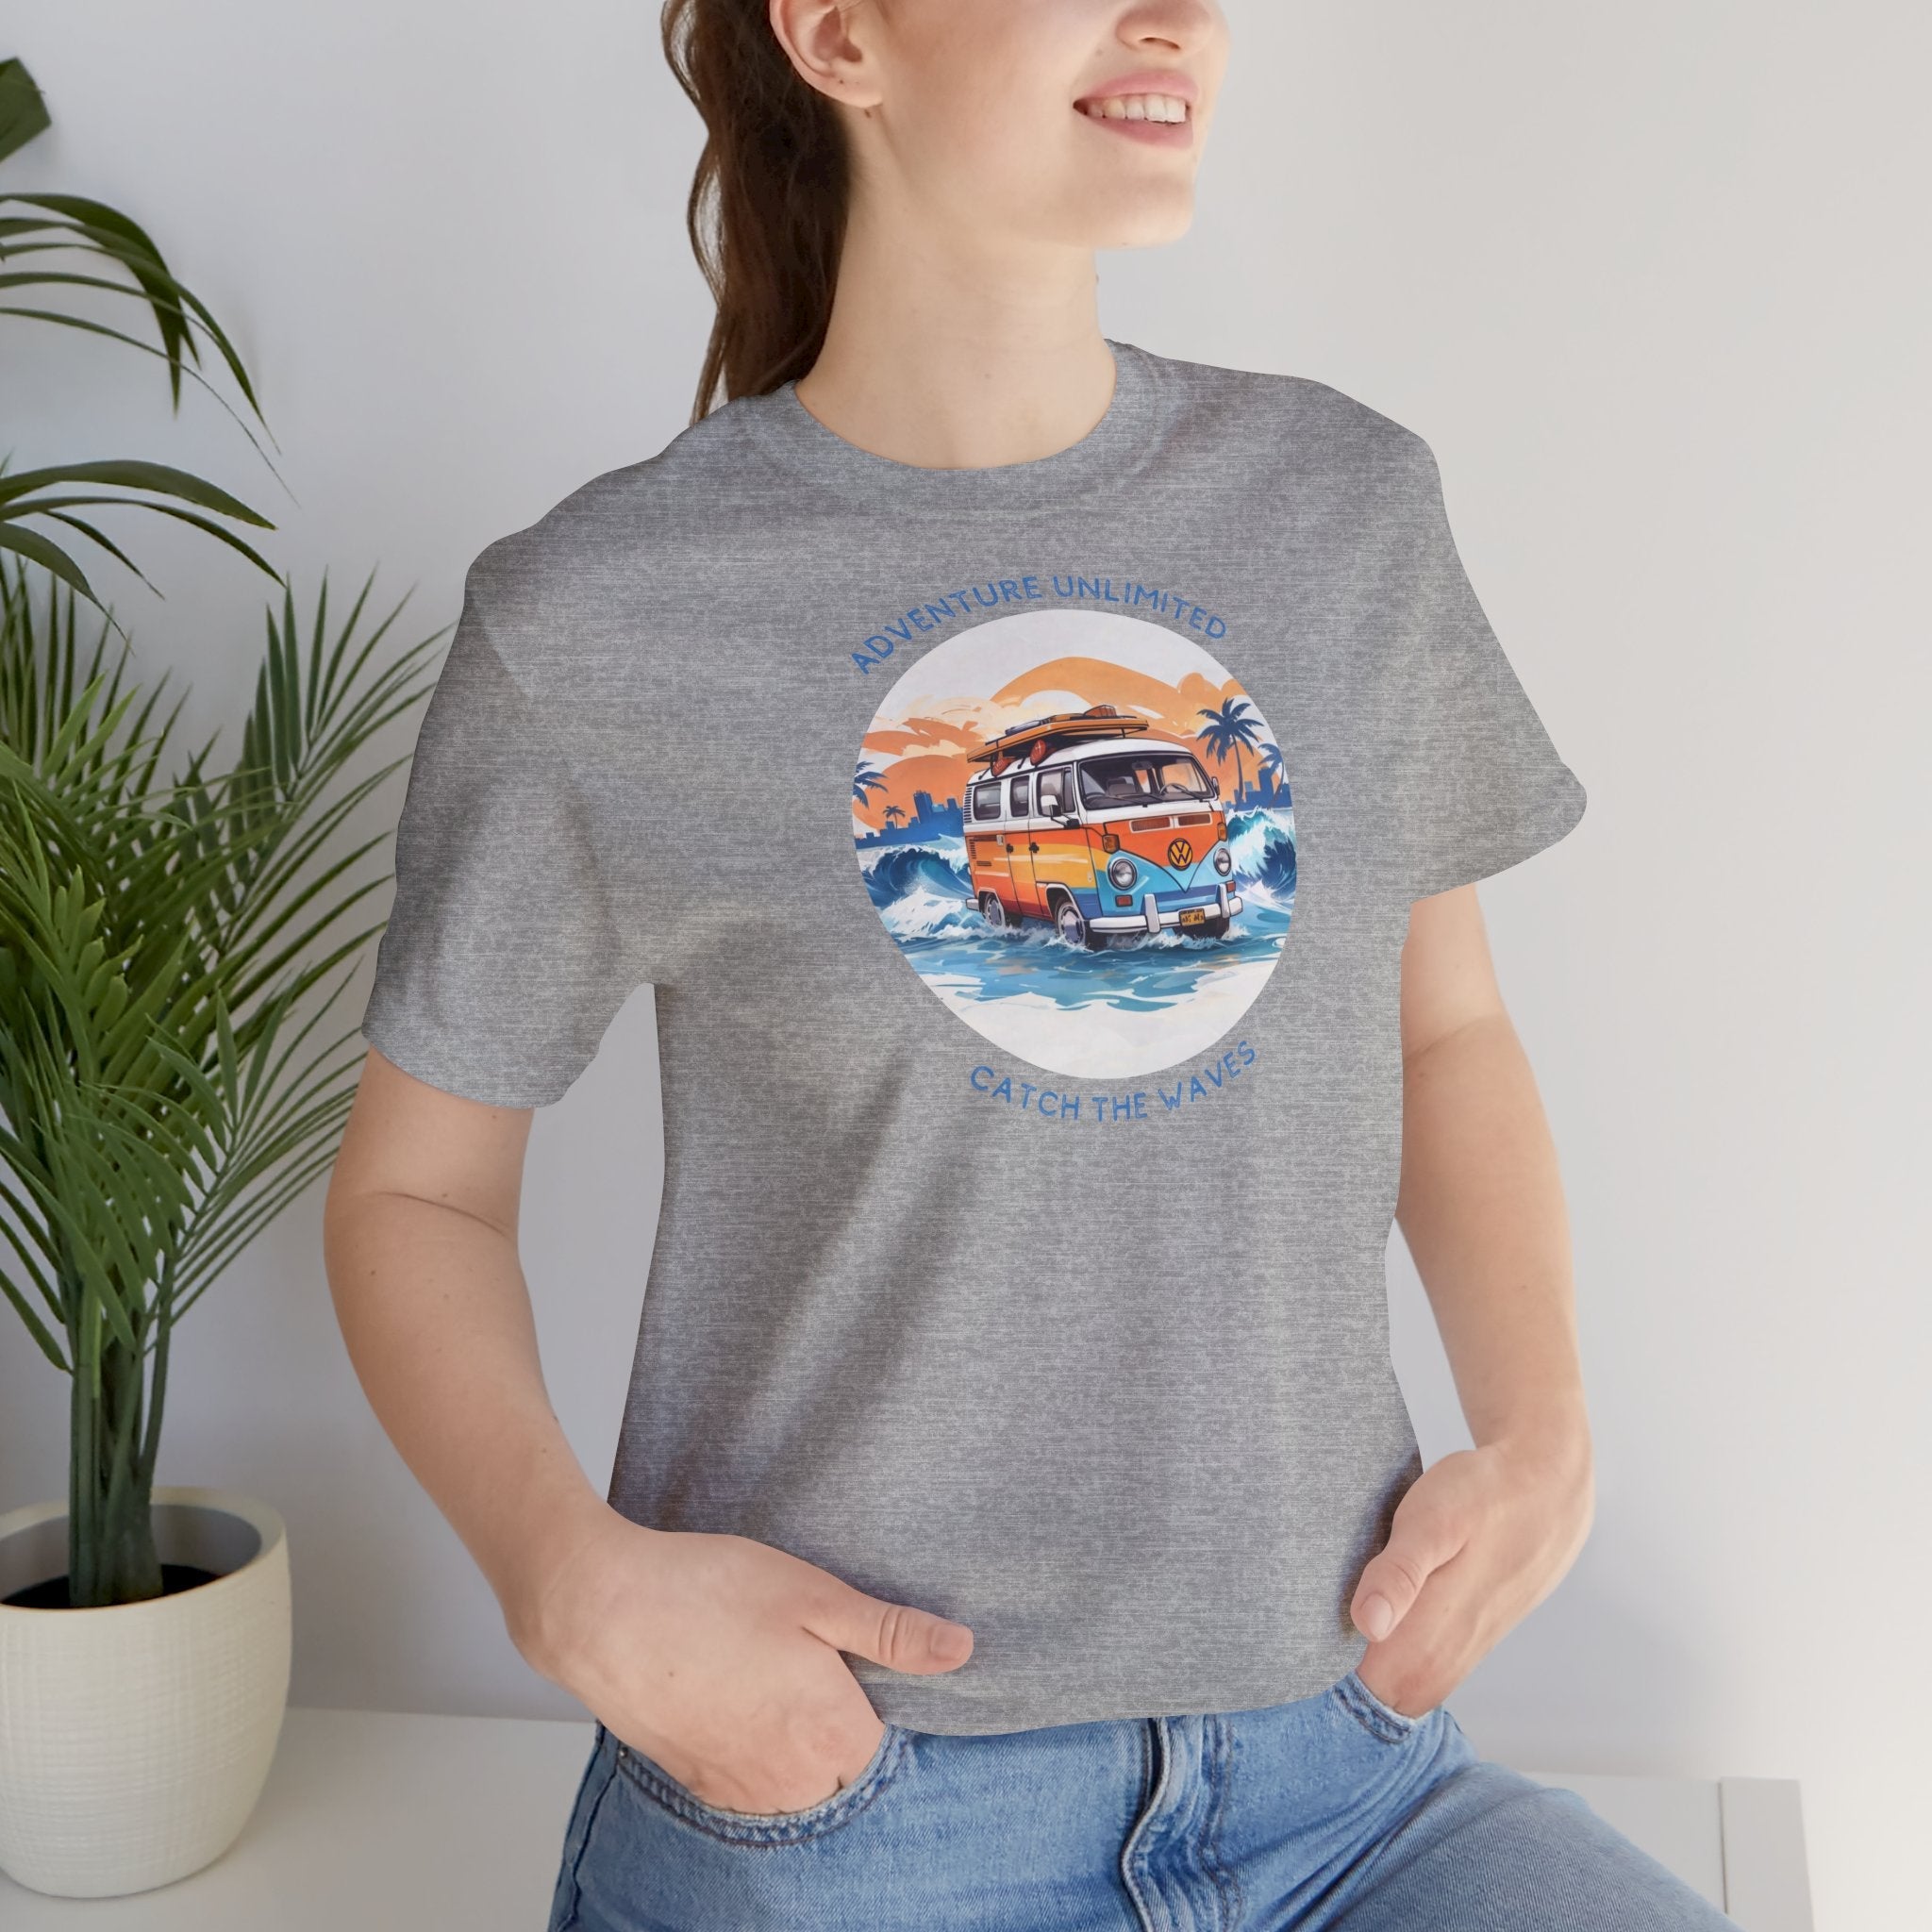 Adventure Unlimited - Surfing T-Shirt - Woman wearing a grey t-shirt with surfboard graphic, printed item